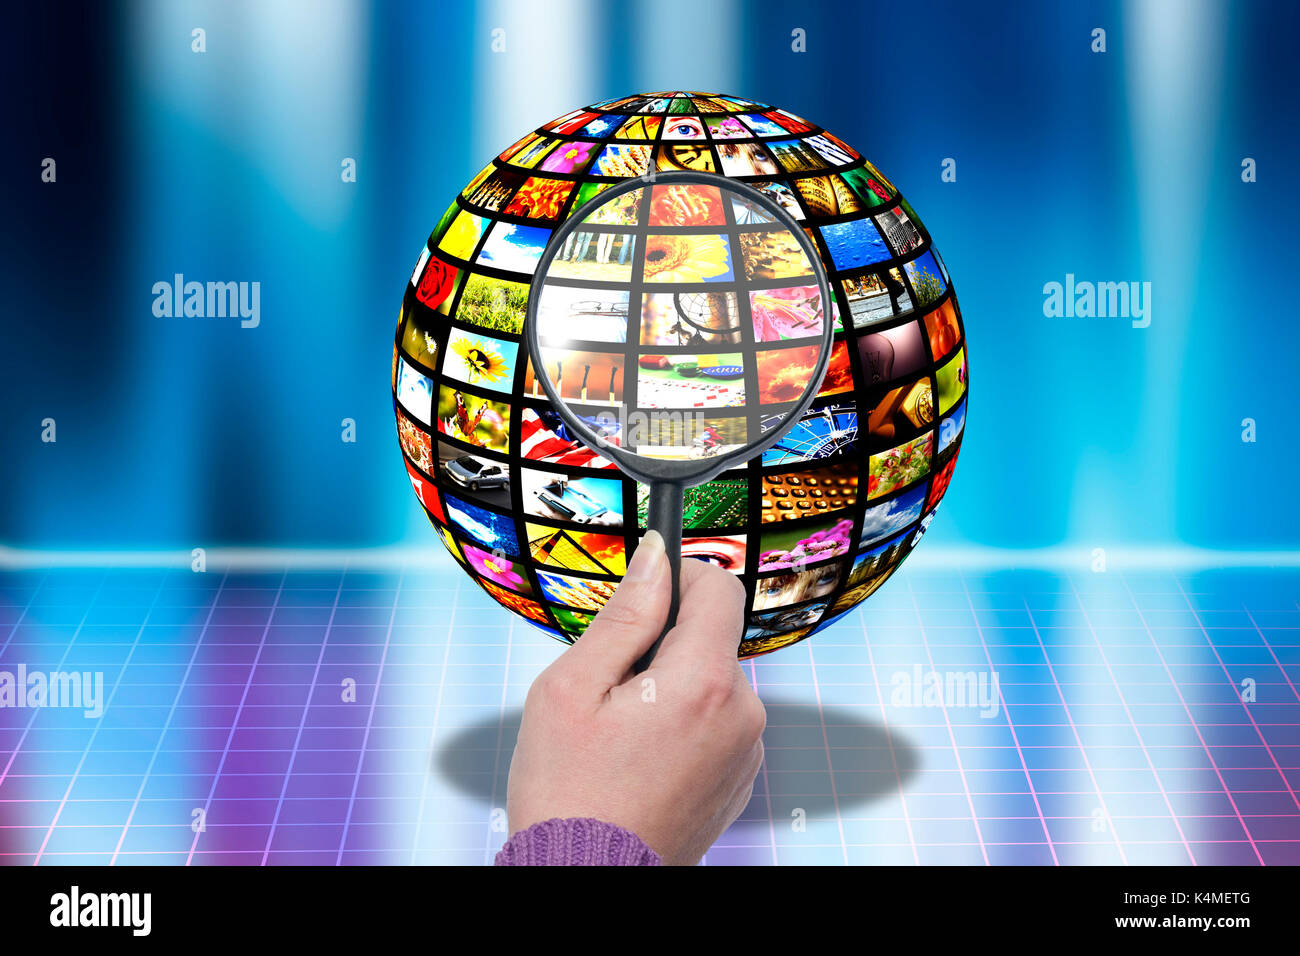 hand with magnifier and pictures on a sphere, image searching concept Stock Photo